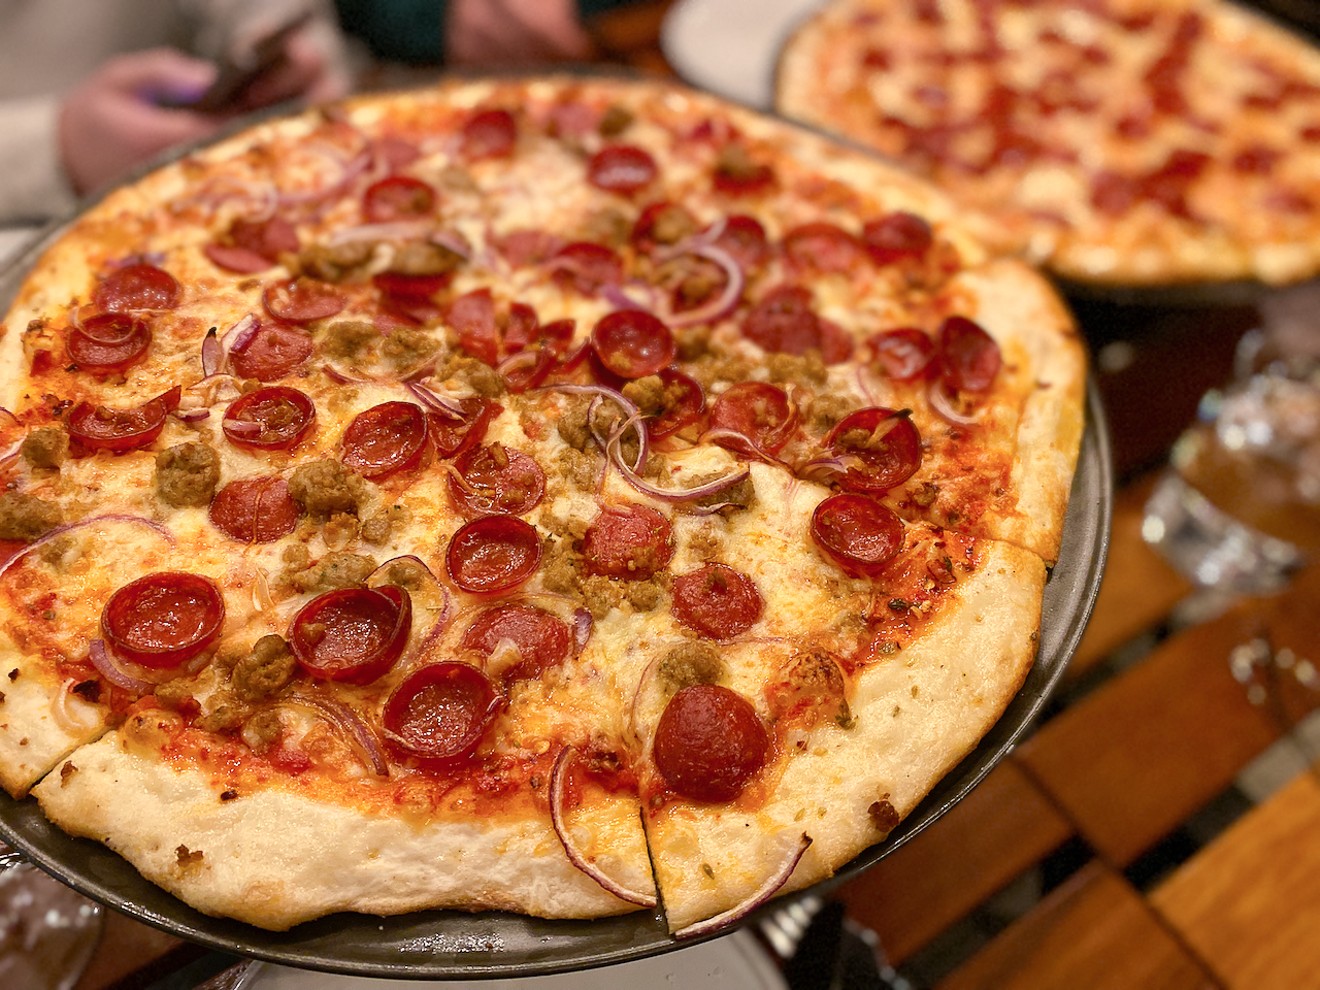 The Donkey is made with a not-very-hot diablo sauce, pepperoni and spicy Italian sausage.